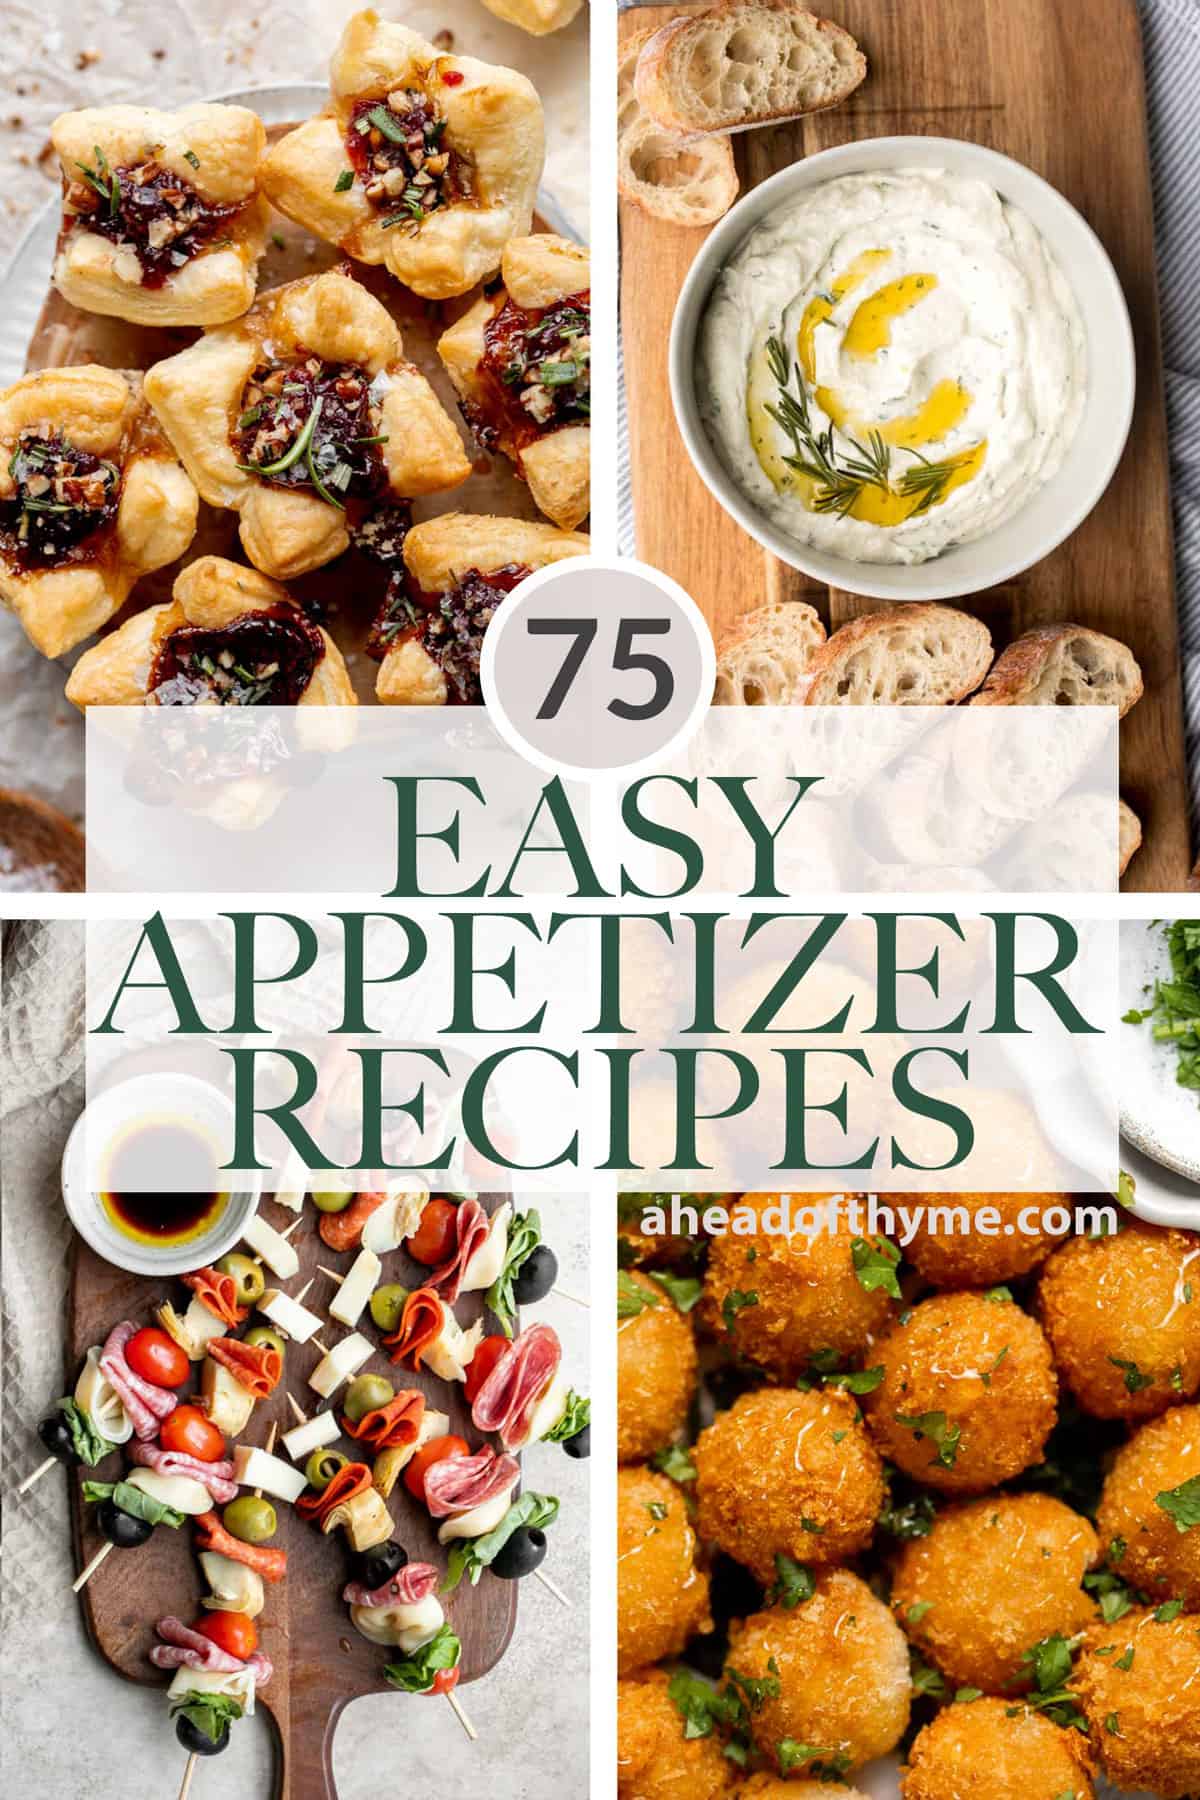 75 Chicken Recipes With 5 Ingredients Or Less: Effortless and Delicious